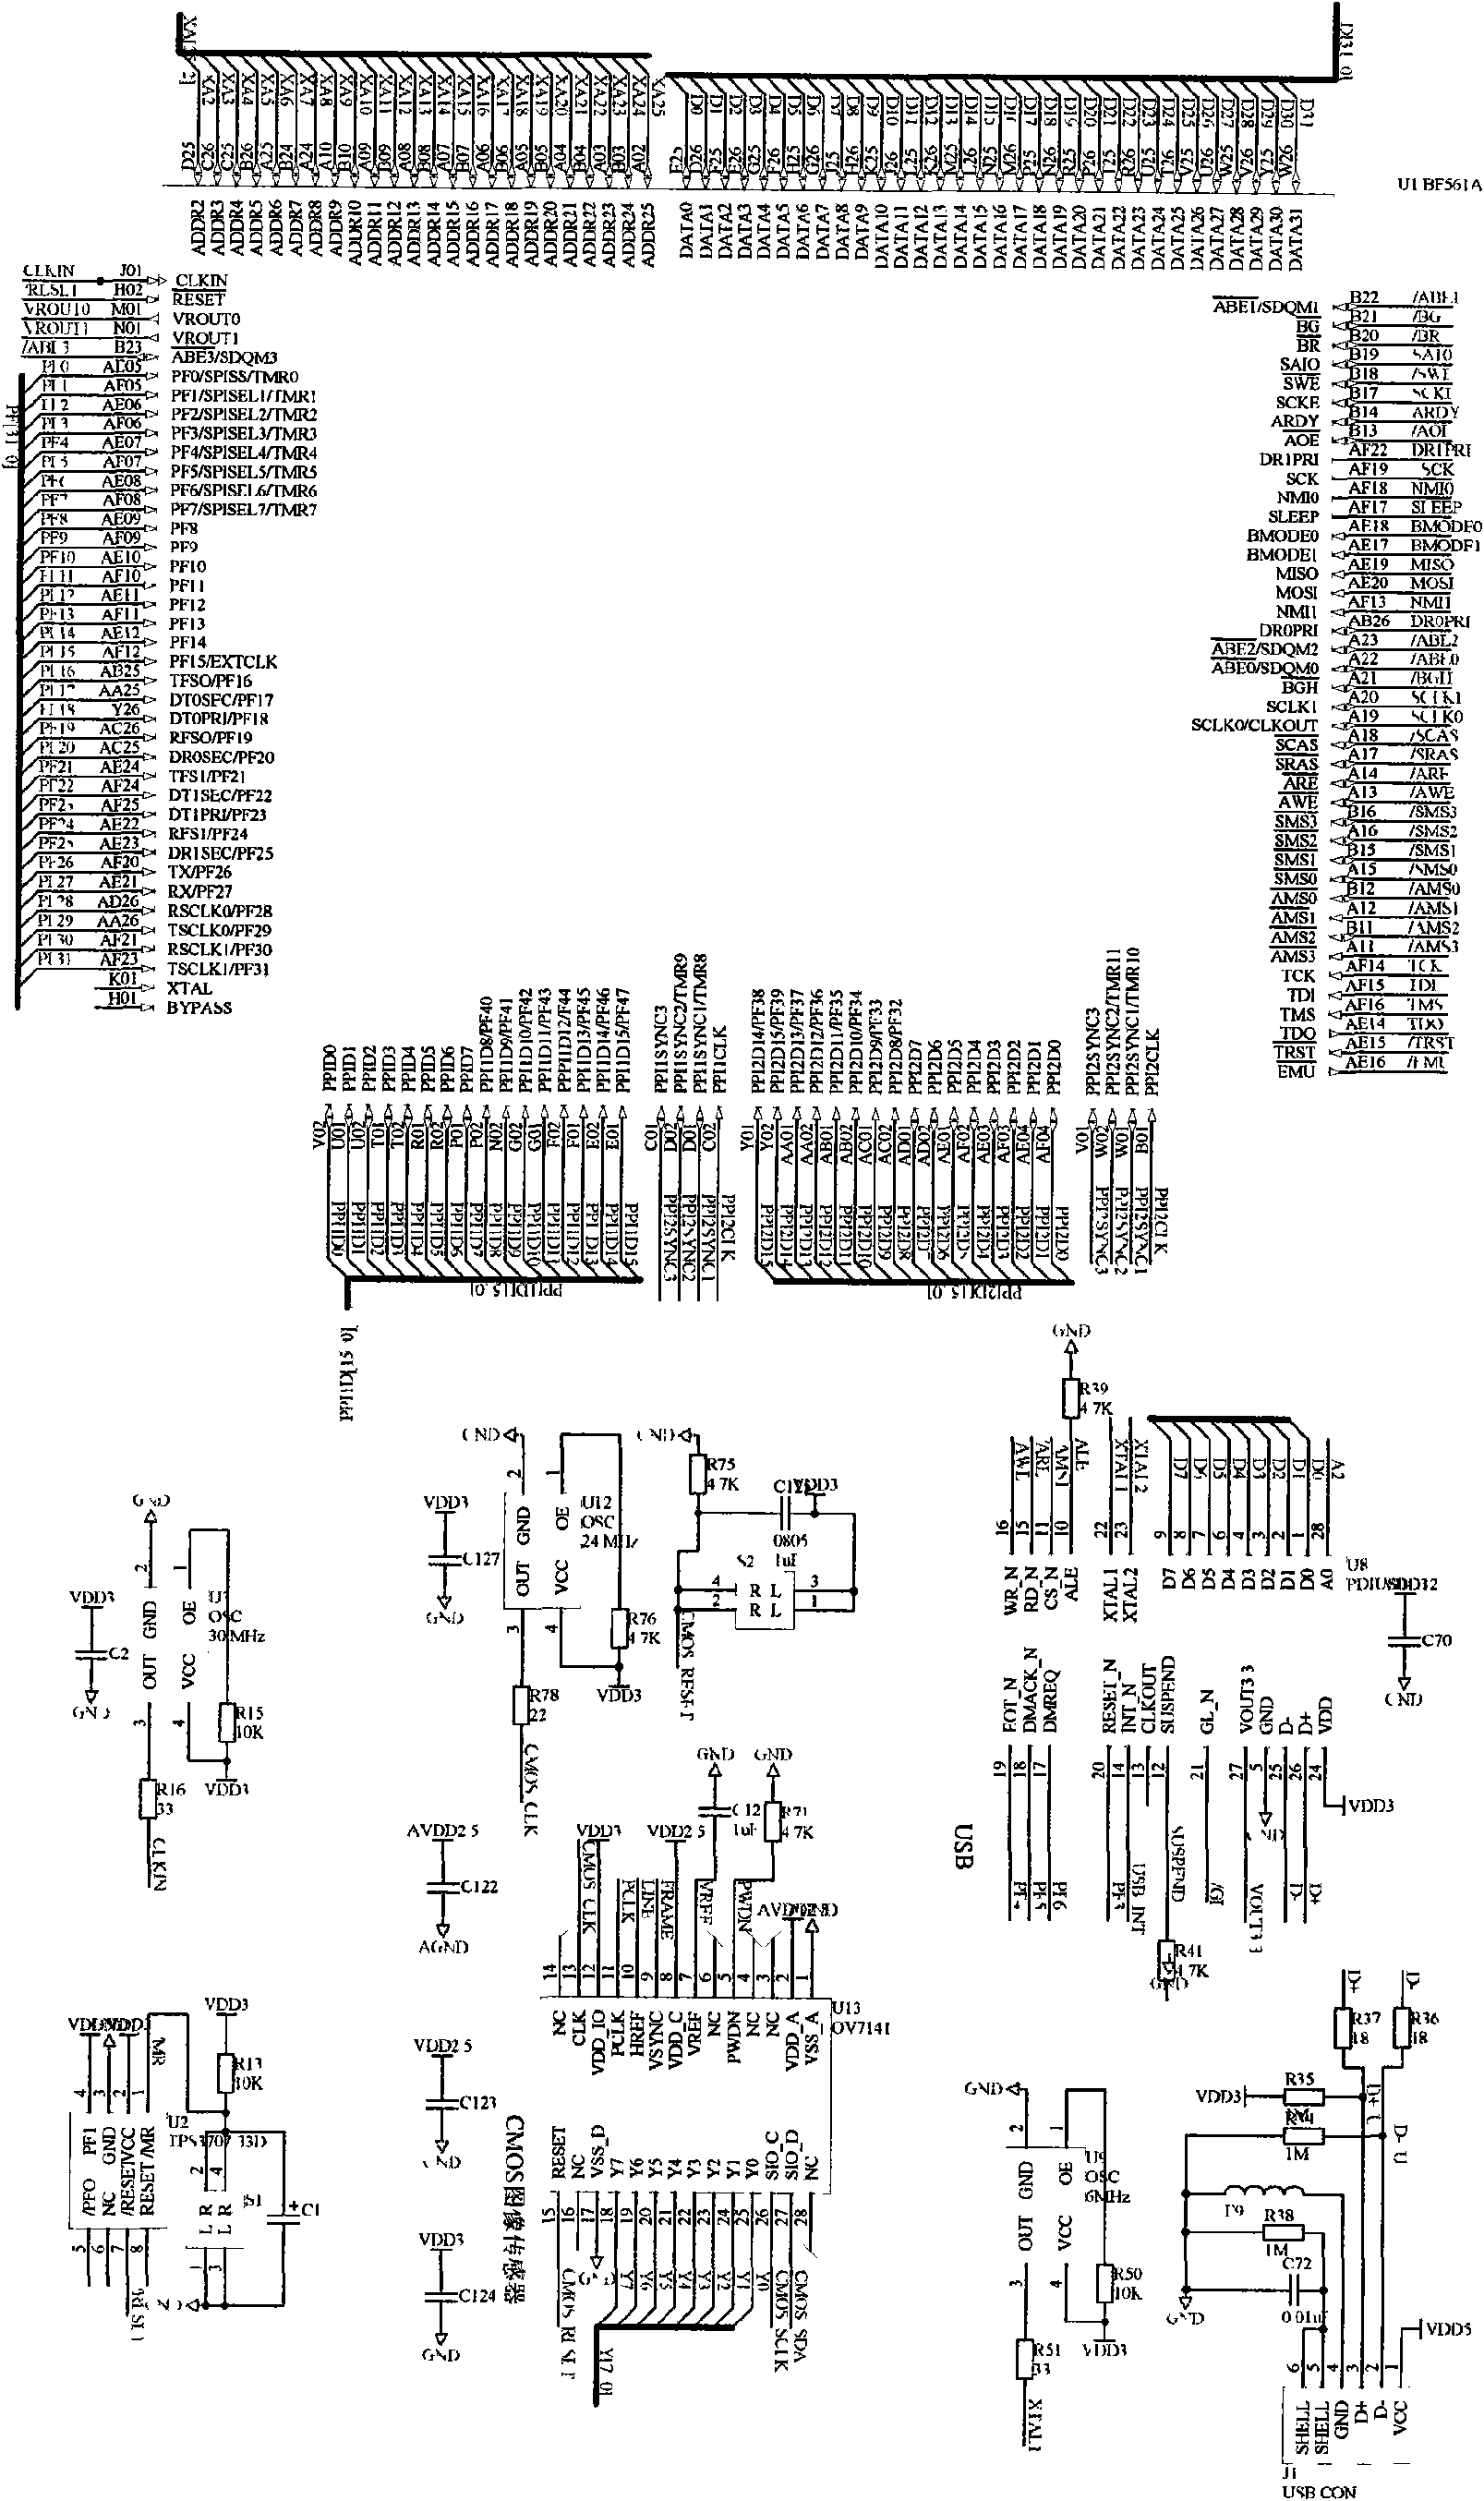 Man-machine interaction device with multiple input operation modes of computer-controlled flat knitting machine